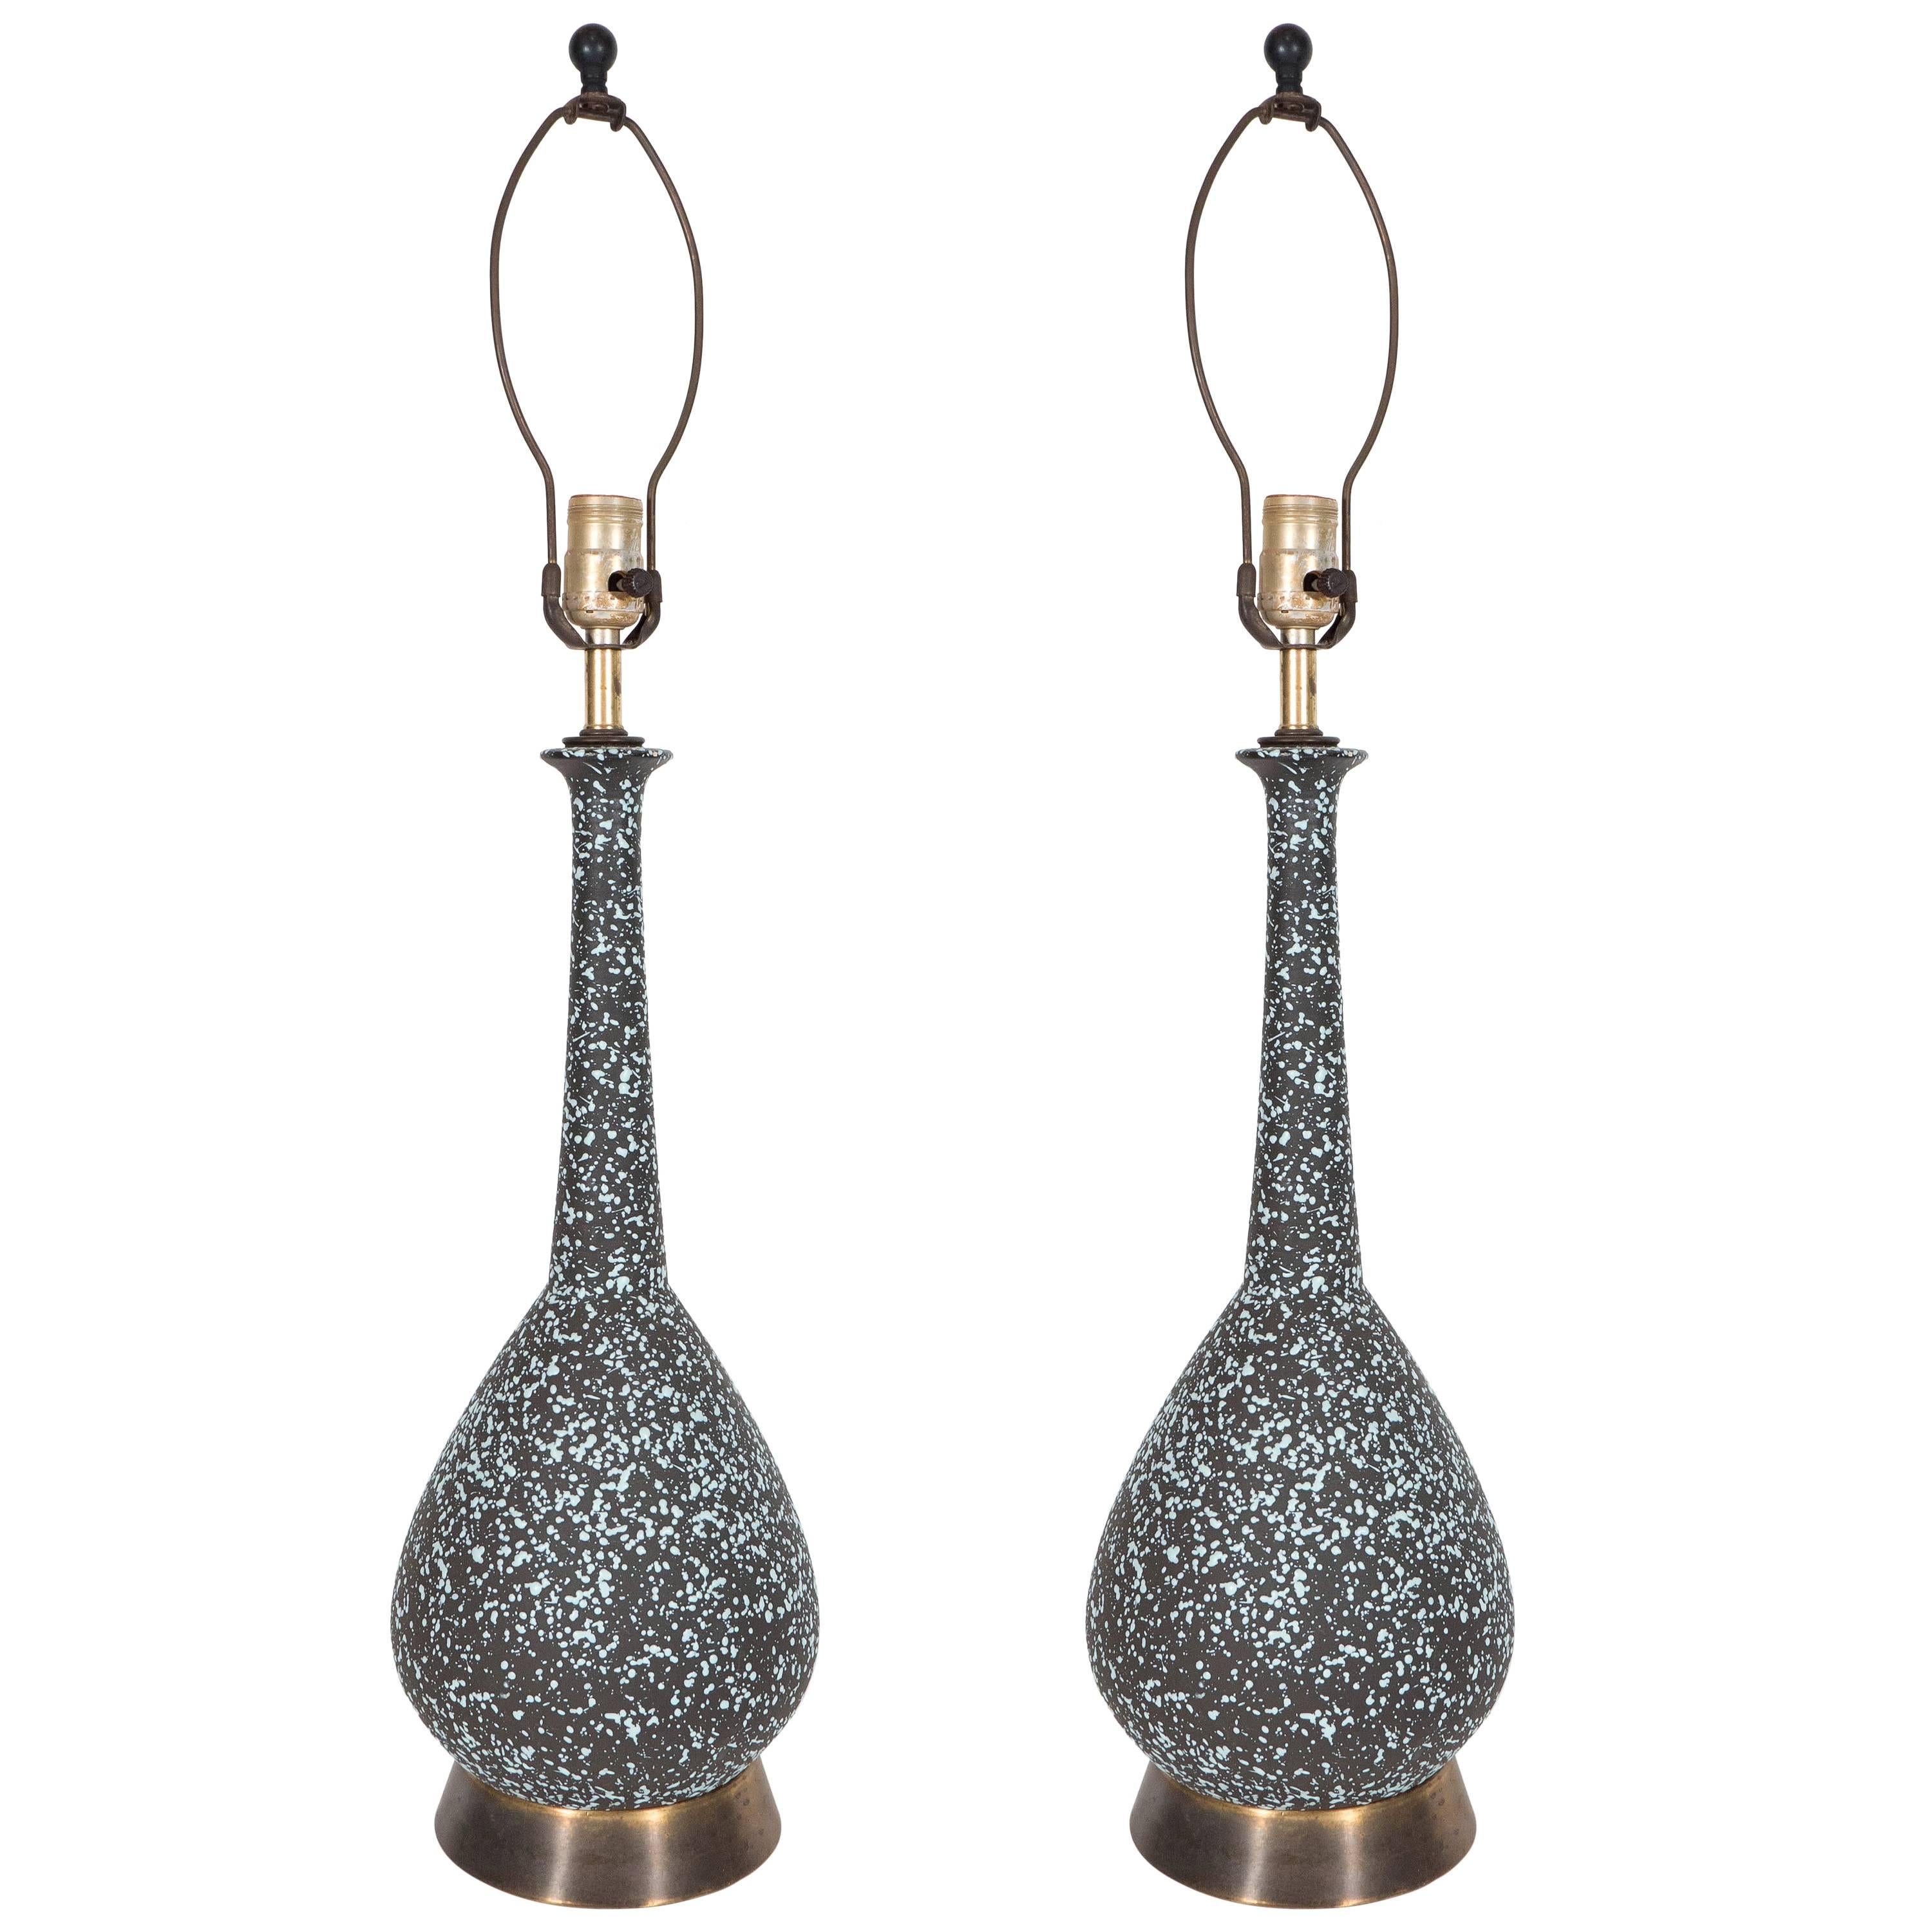 Pair of Mid-Century Lamps with Elongated Necks in Black and Aqua Volcanic Glaze